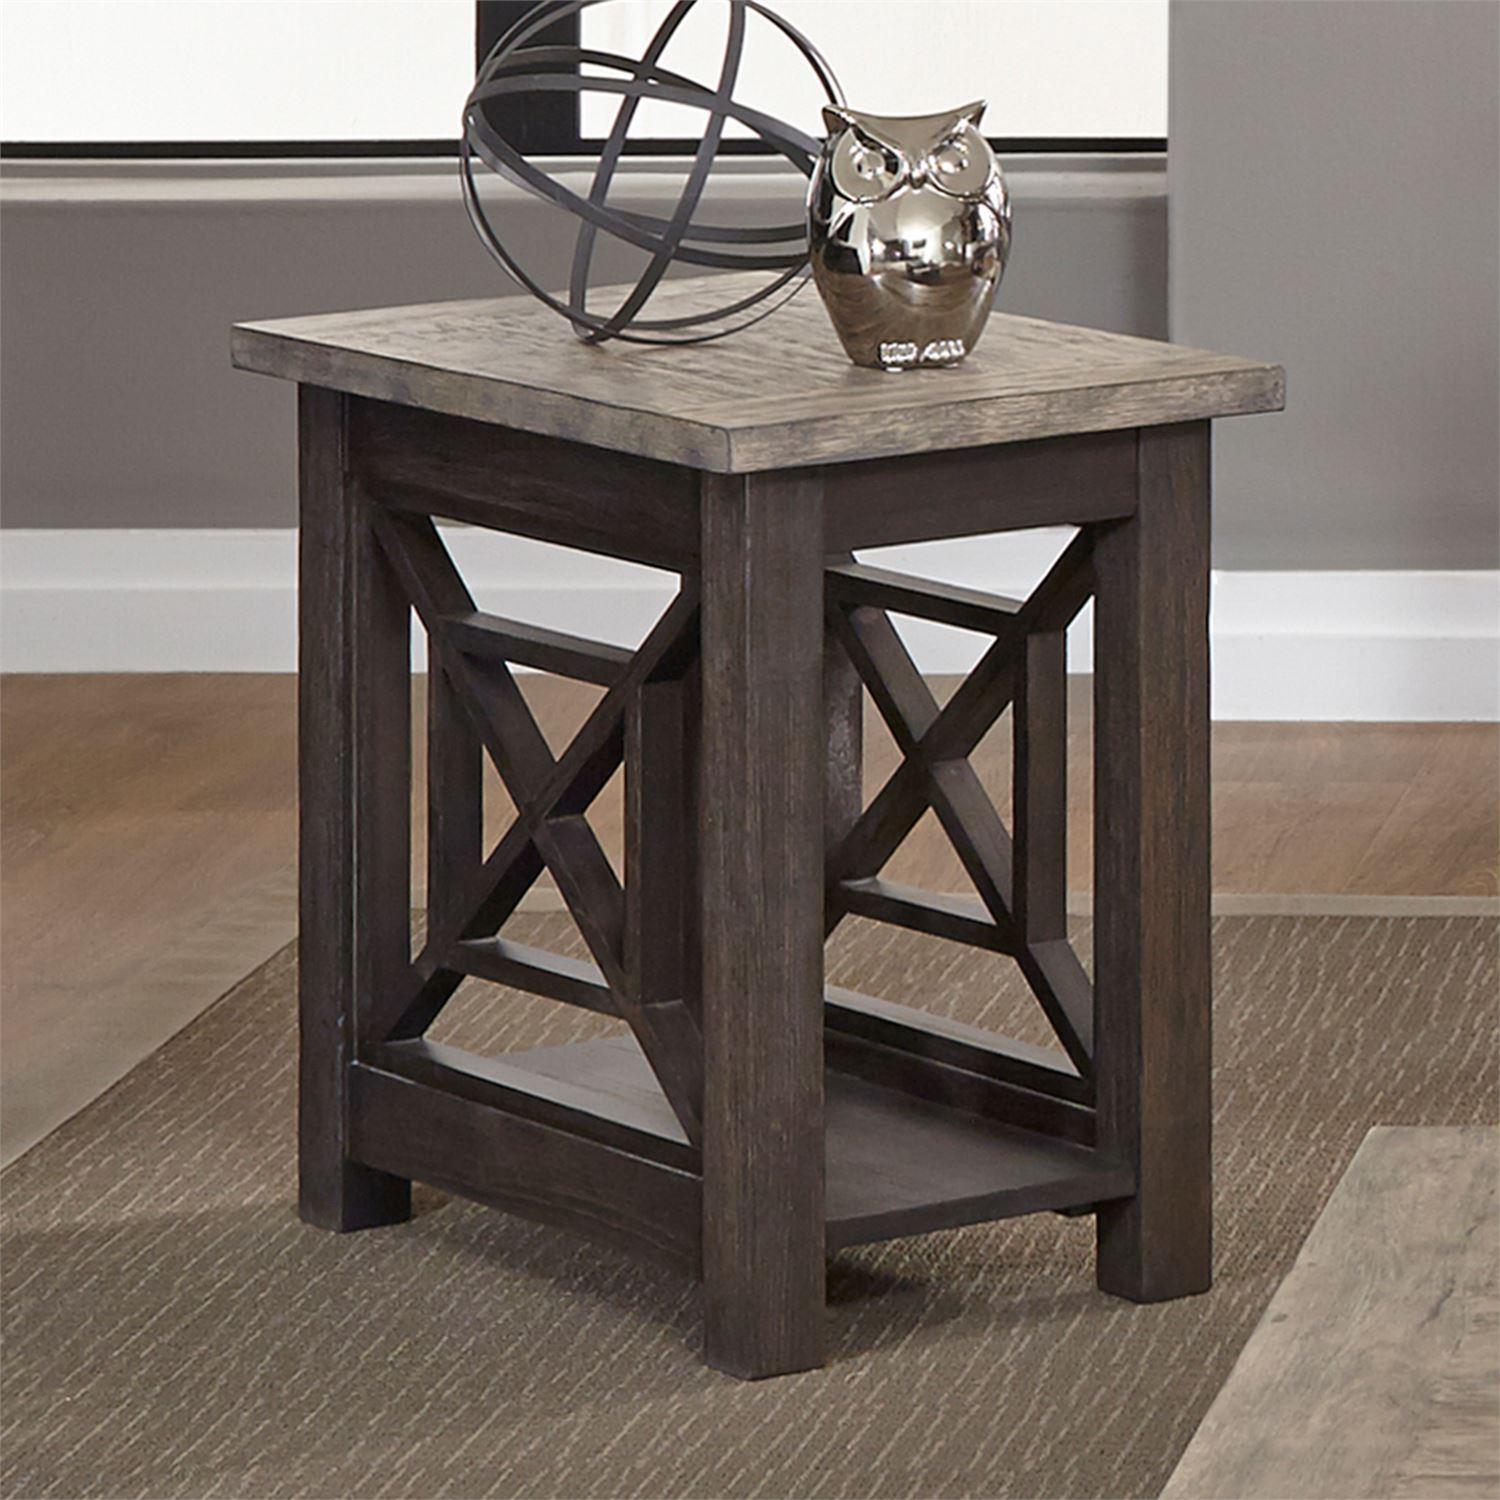 Transitional End Table Heatherbrook  (422-OT) End Table 422-OT1021 in Gray 